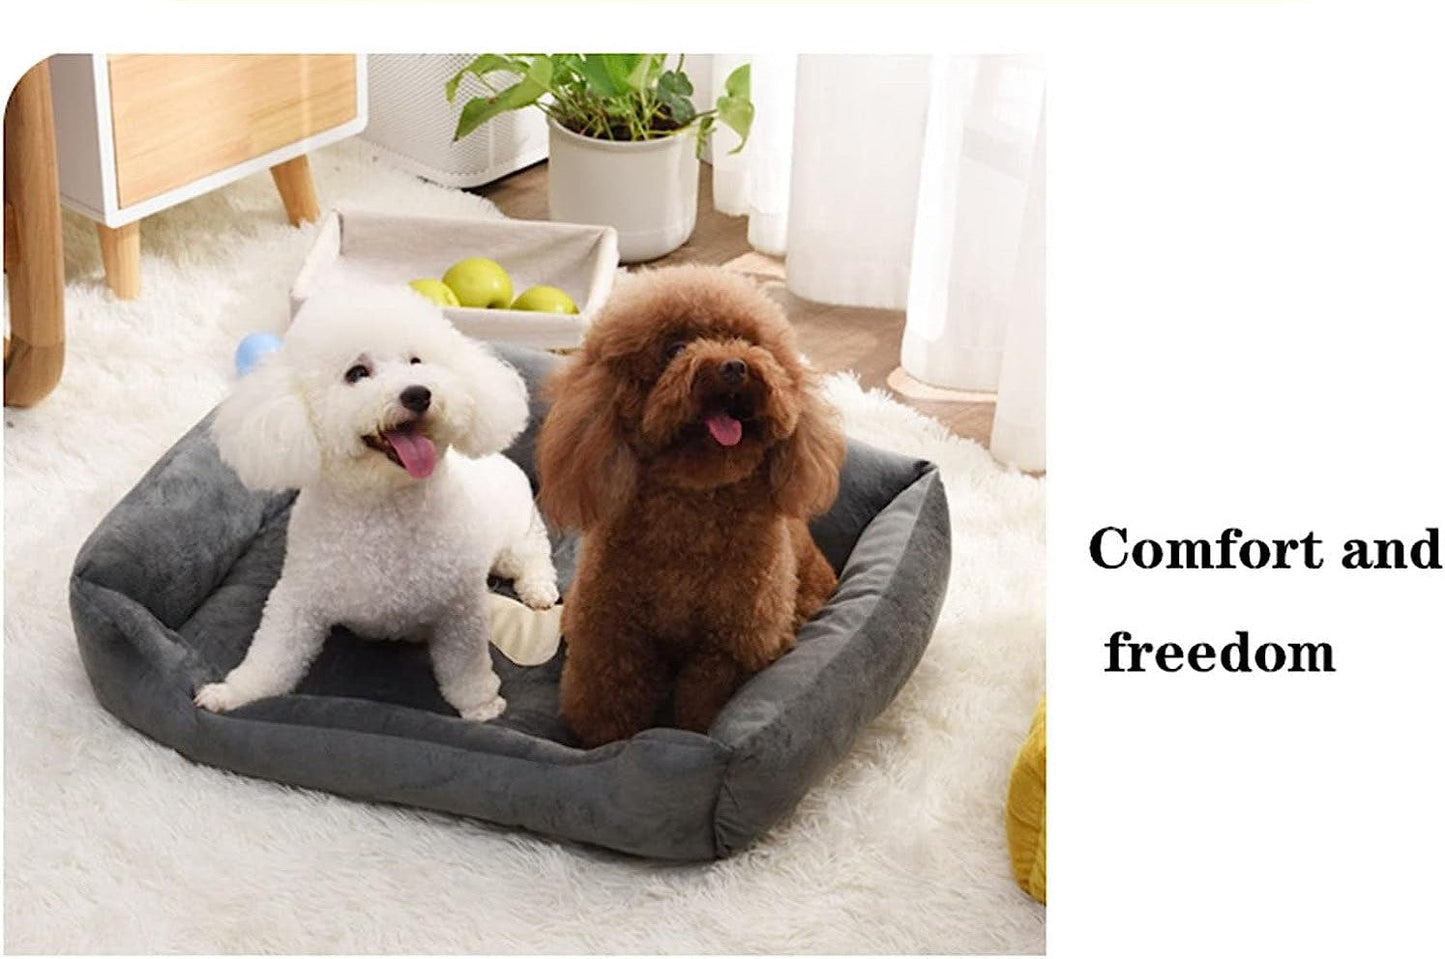 Super Soft Dog Beds Waterproof Bottom - Warm Bed For Dog & Cat - Brown and Navy